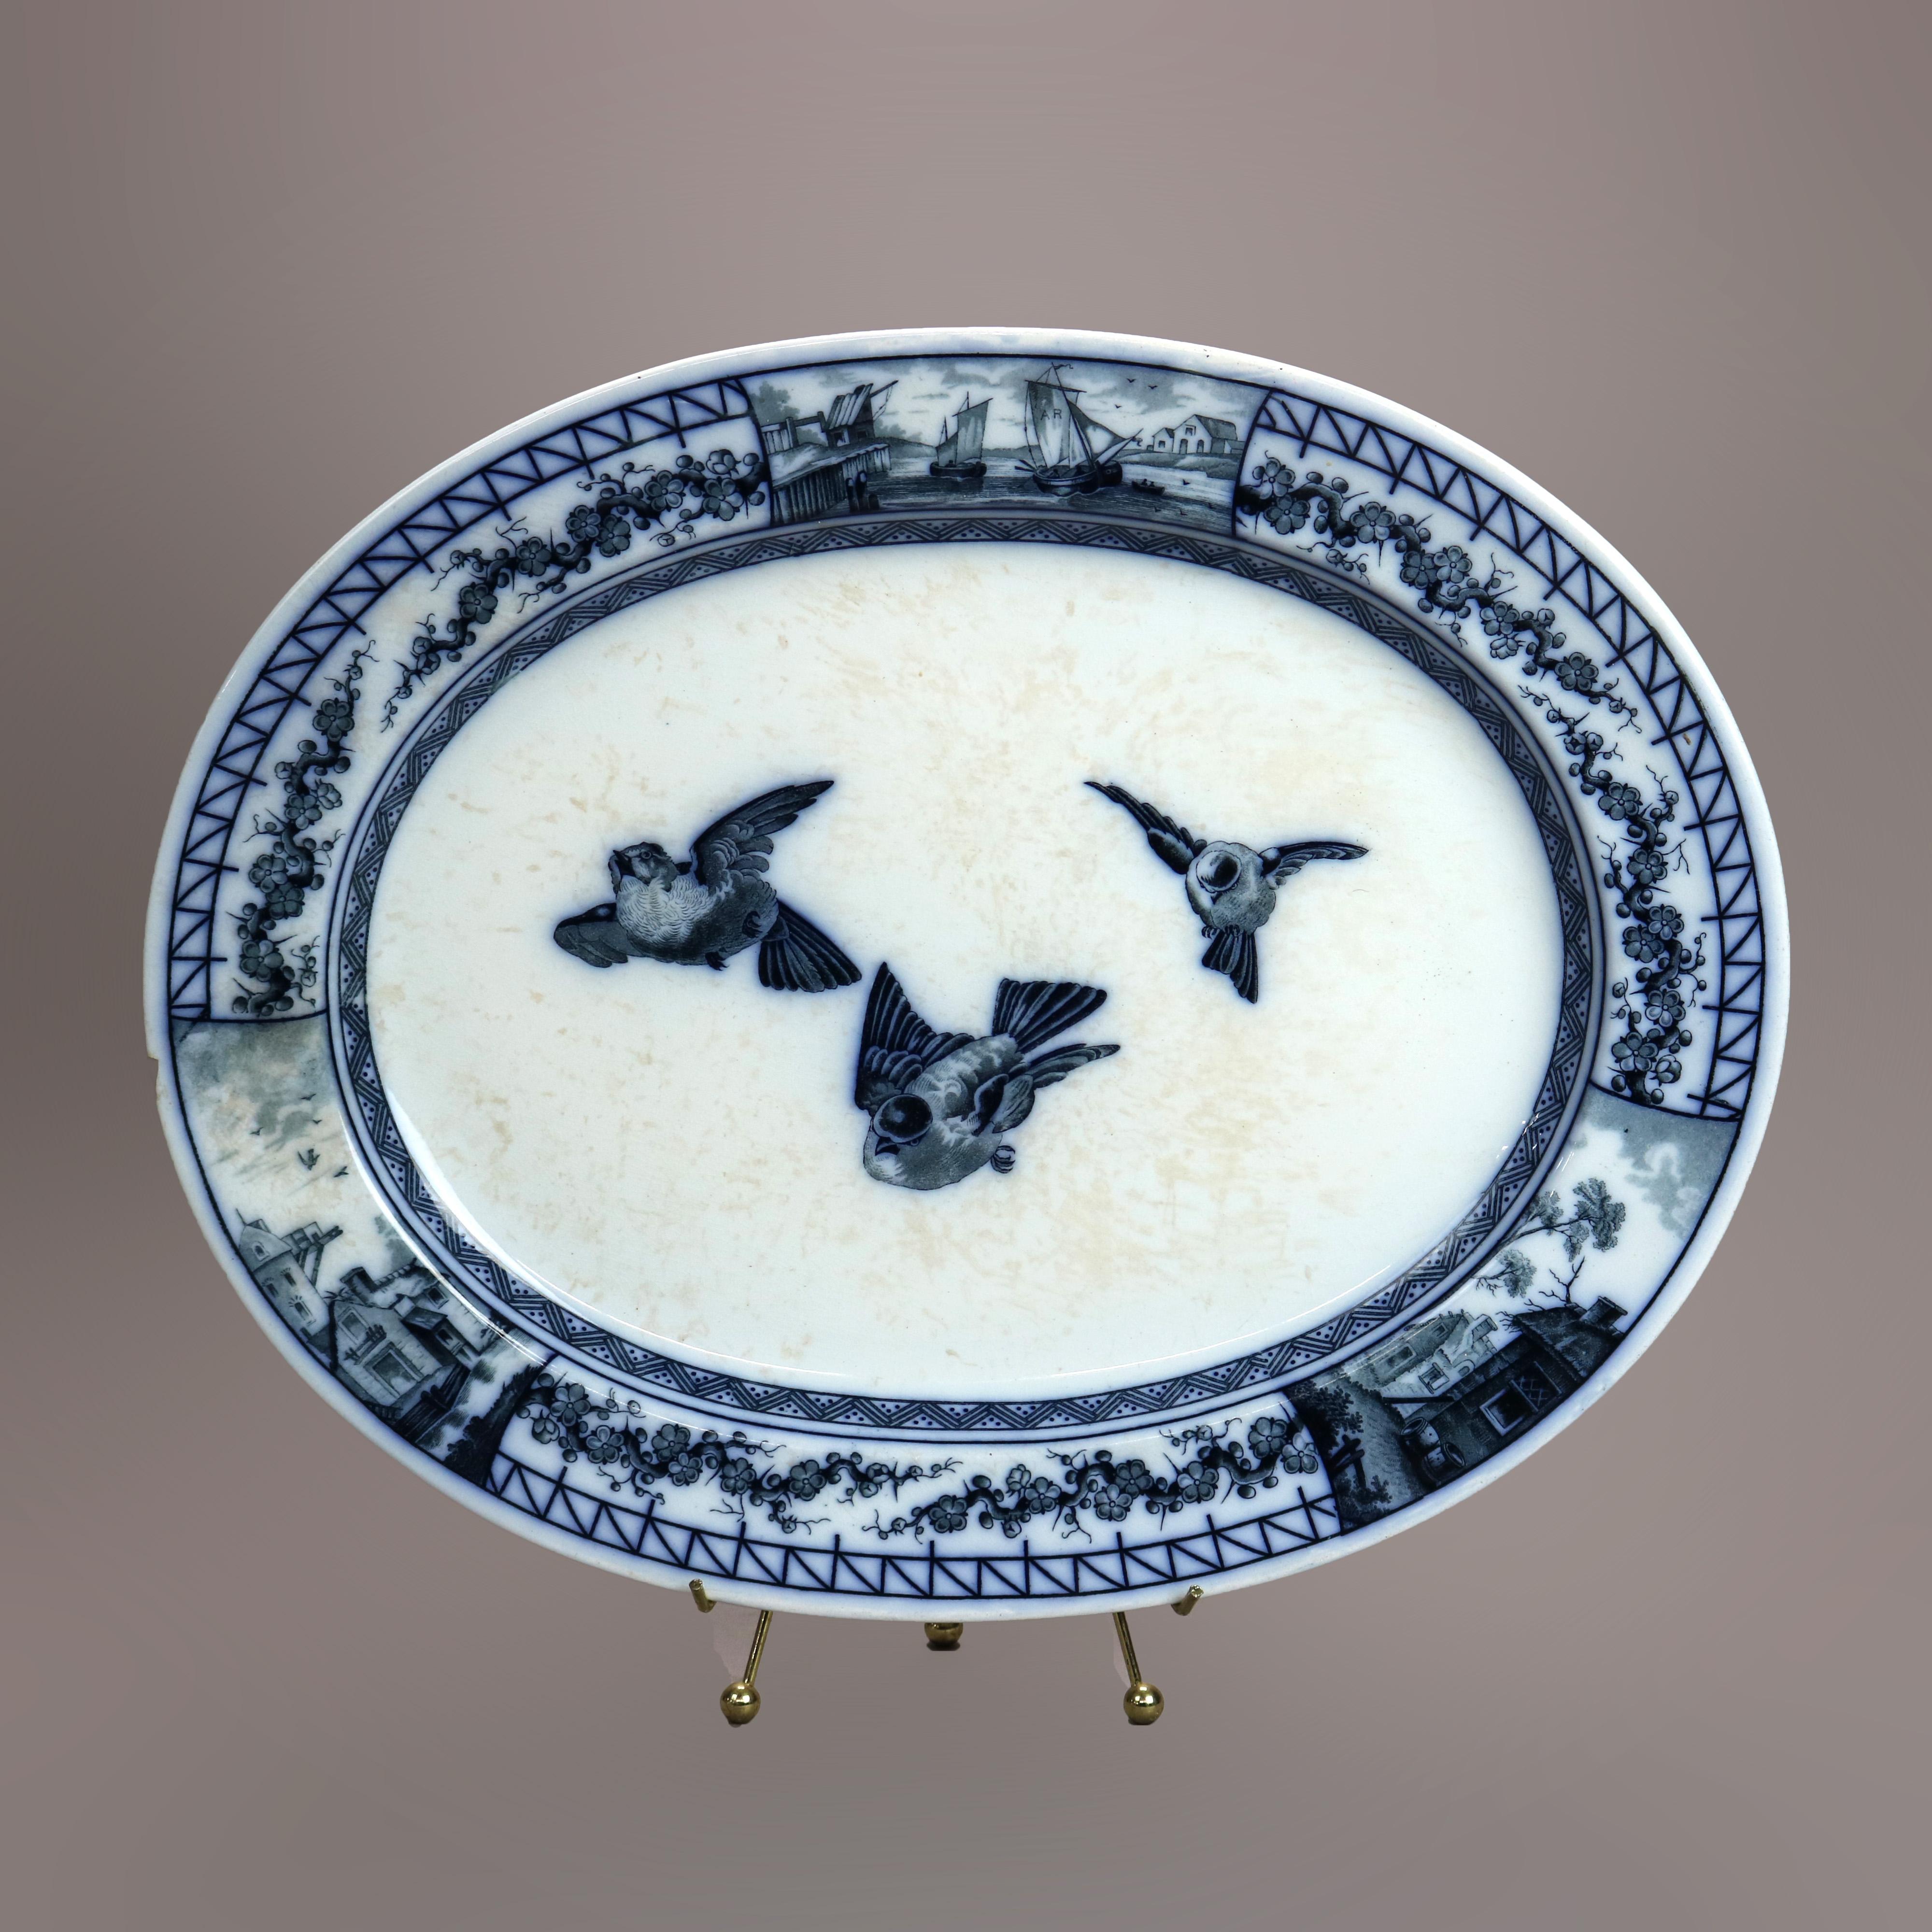 An antique French platter attributed to BWM & Co. offers glazed pottery construction with well having birds in flight with surround having reserves including maritime seascape and windmill scenes, maker mark en verso as photographed, reminiscent of